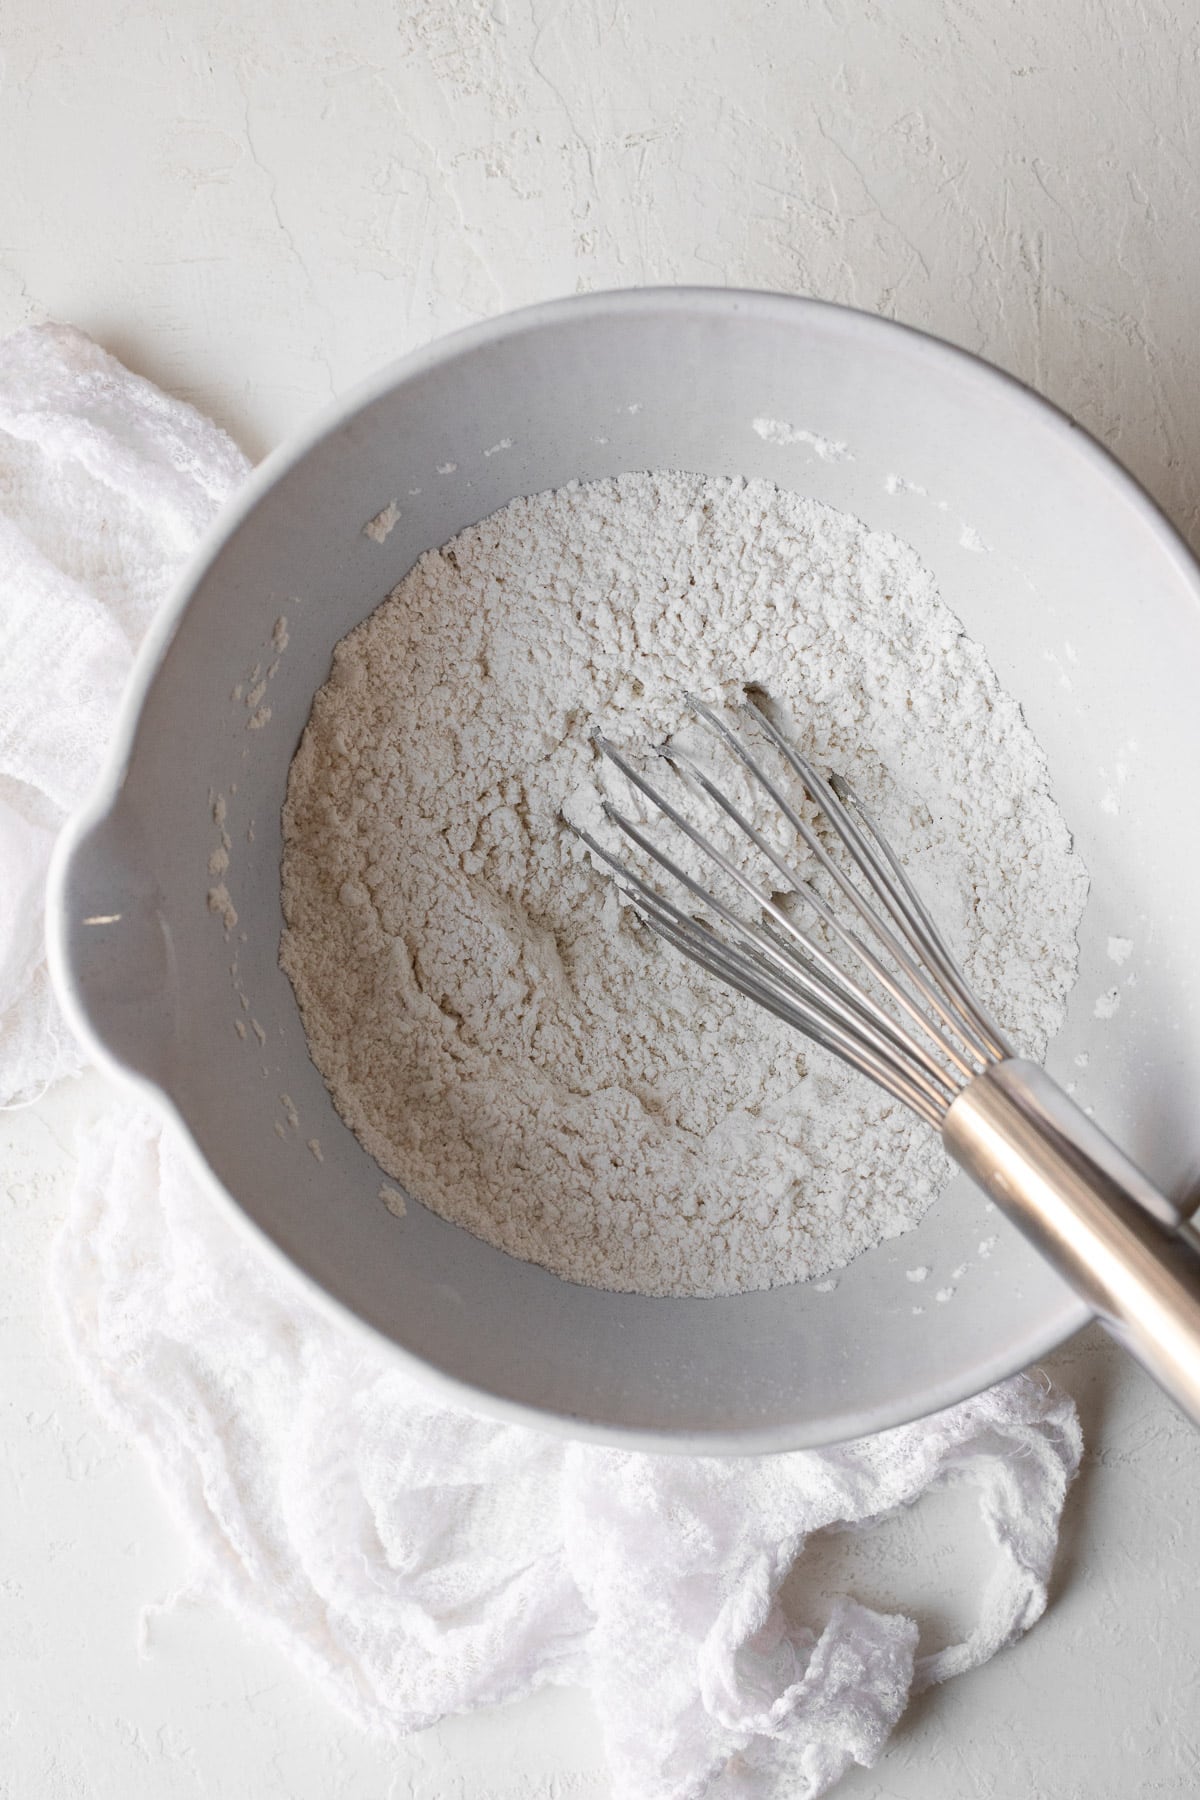 Flour, salt, baking powder, and baking soda whisked together in a bowl.